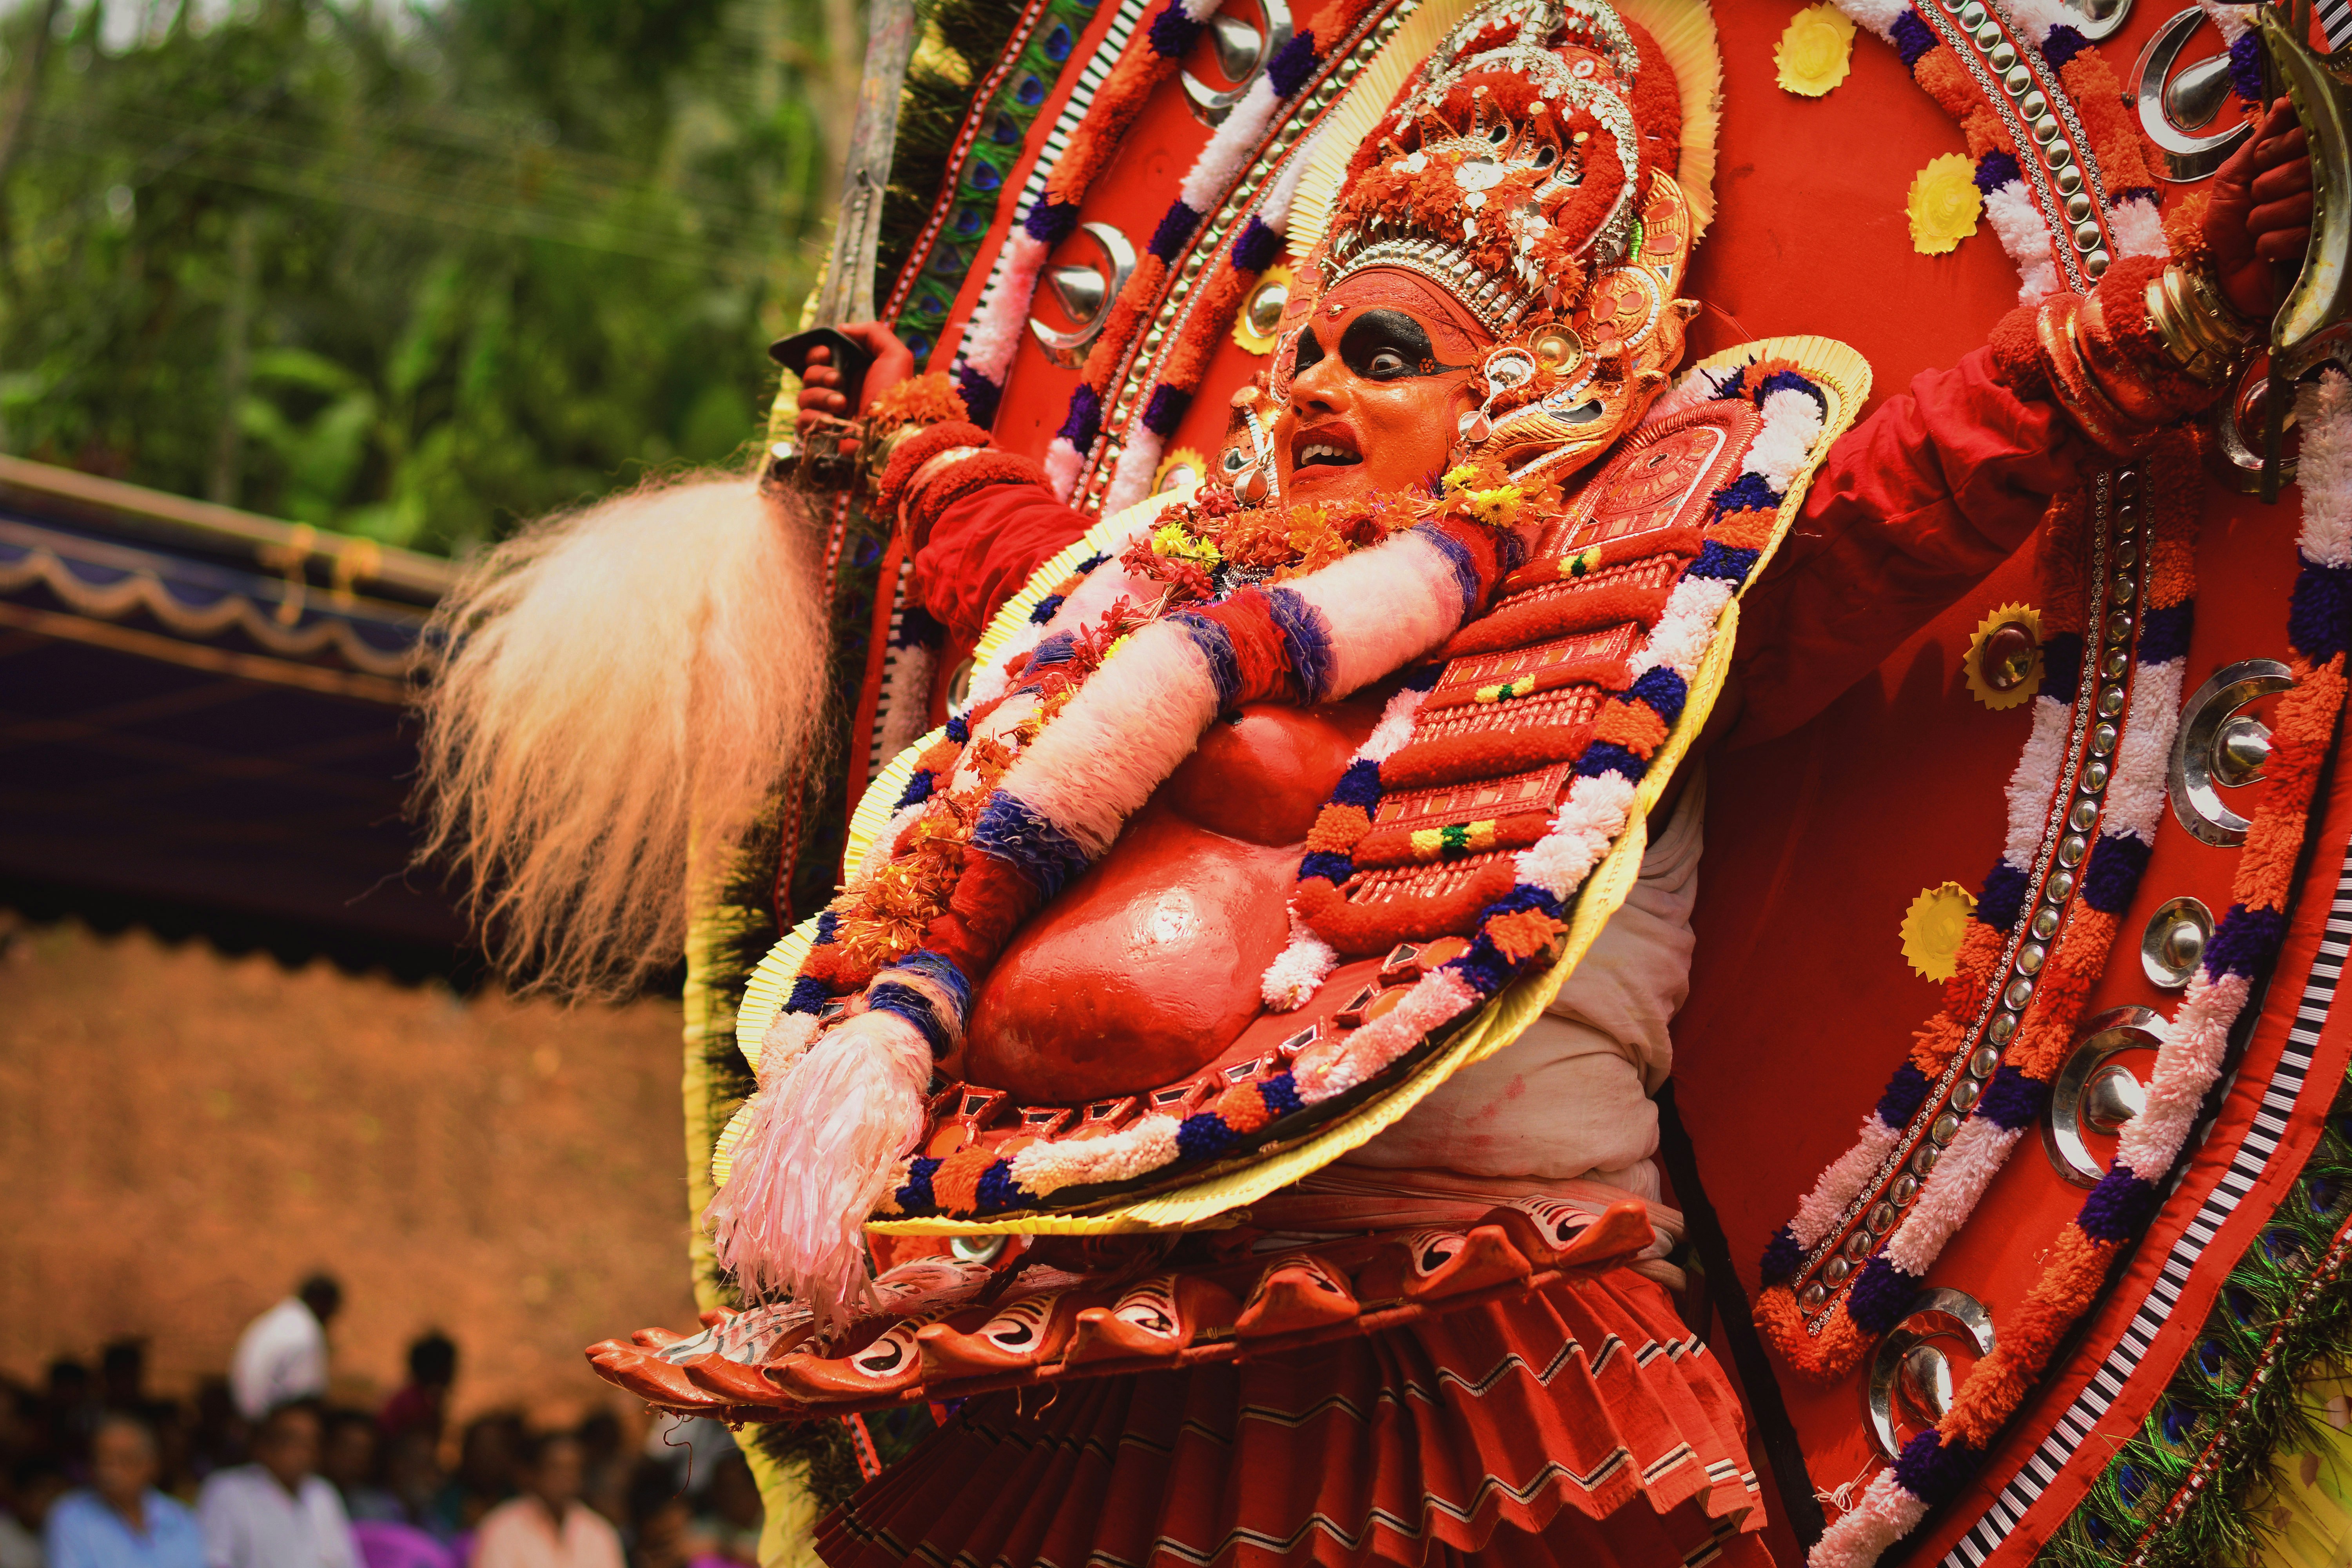 Theyyam is a ritual form in Kerala, India. If you have ever had a chance to see this ritual, you will know that the person performing the Theyyam is considered as the supreme power while in that state. This particular Theyyam is a ‘Chaamundi’, a fearsome aspect of Devi, one of the seven Matrikas (mother goddesses) in Hindu mythology. This was one of 39 Theyyam that took place at my native place spanning for a period of 3 days. This still perfectly portrays the spine-chilling energy of the epitome while he performs the ritual with sheer faith and zeal.